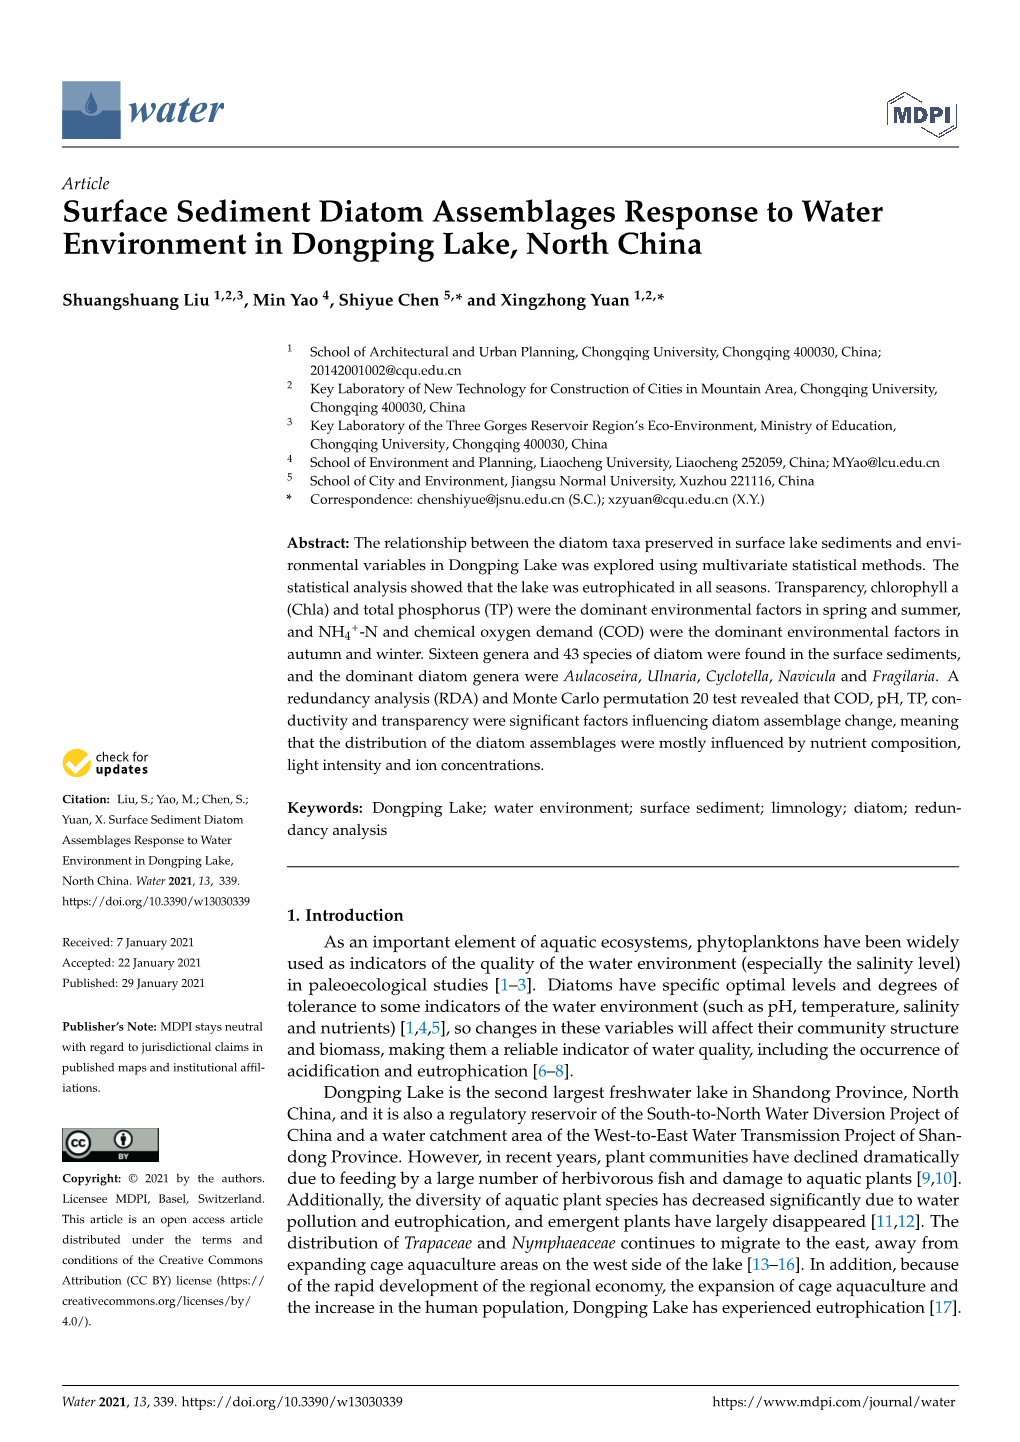 Surface Sediment Diatom Assemblages Response to Water Environment in Dongping Lake, North China